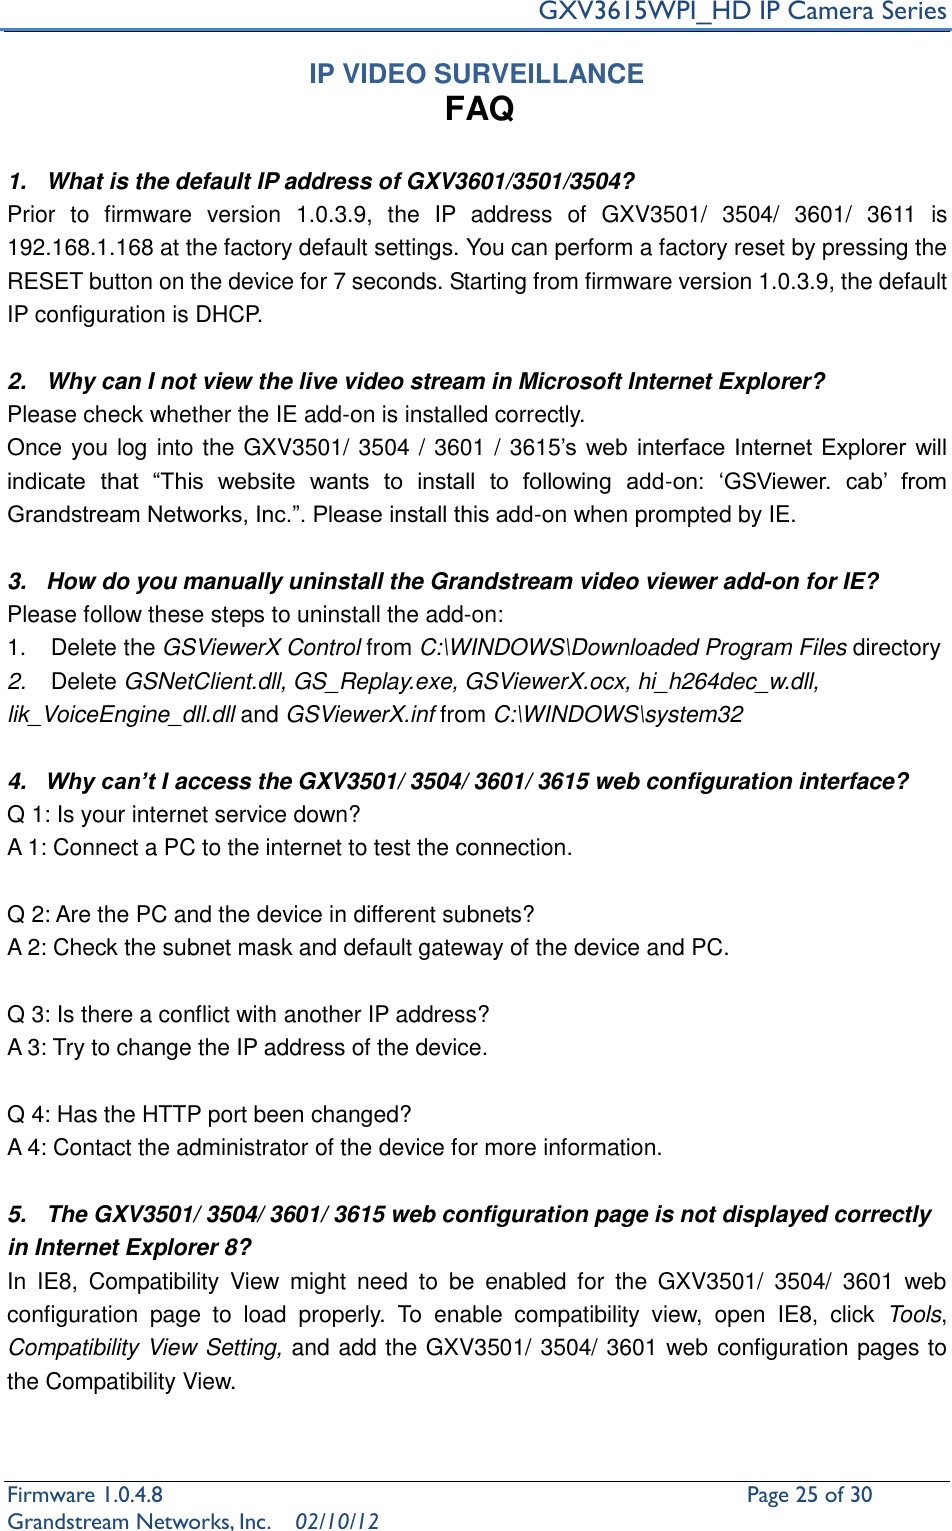     GXV3615WPI_HD IP Camera Series Firmware 1.0.4.8                                                   Page 25 of 30     Grandstream Networks, Inc.  02/10/12  IP VIDEO SURVEILLANCE FAQ  1.  What is the default IP address of GXV3601/3501/3504? Prior  to  firmware  version  1.0.3.9,  the  IP  address  of  GXV3501/  3504/  3601/  3611  is 192.168.1.168 at the factory default settings. You can perform a factory reset by pressing the RESET button on the device for 7 seconds. Starting from firmware version 1.0.3.9, the default IP configuration is DHCP.  2.  Why can I not view the live video stream in Microsoft Internet Explorer? Please check whether the IE add-on is installed correctly.   Once you log into the GXV3501/ 3504 / 3601 / 3615’s  web interface Internet  Explorer will indicate  that  “This  website  wants  to  install  to  following  add-on:  ‘GSViewer.  cab’  from Grandstream Networks, Inc.”. Please install this add-on when prompted by IE.  3.  How do you manually uninstall the Grandstream video viewer add-on for IE?   Please follow these steps to uninstall the add-on:   1.  Delete the GSViewerX Control from C:\WINDOWS\Downloaded Program Files directory   2. Delete GSNetClient.dll, GS_Replay.exe, GSViewerX.ocx, hi_h264dec_w.dll, lik_VoiceEngine_dll.dll and GSViewerX.inf from C:\WINDOWS\system32  4. Why can’t I access the GXV3501/ 3504/ 3601/ 3615 web configuration interface?   Q 1: Is your internet service down?   A 1: Connect a PC to the internet to test the connection.  Q 2: Are the PC and the device in different subnets?   A 2: Check the subnet mask and default gateway of the device and PC.  Q 3: Is there a conflict with another IP address?   A 3: Try to change the IP address of the device.    Q 4: Has the HTTP port been changed?   A 4: Contact the administrator of the device for more information.  5.  The GXV3501/ 3504/ 3601/ 3615 web configuration page is not displayed correctly in Internet Explorer 8? In  IE8,  Compatibility  View  might  need  to  be  enabled  for  the  GXV3501/  3504/  3601  web configuration  page  to  load  properly.  To  enable  compatibility  view,  open  IE8,  click  Tools, Compatibility View Setting, and add the GXV3501/ 3504/ 3601 web configuration pages to the Compatibility View.    